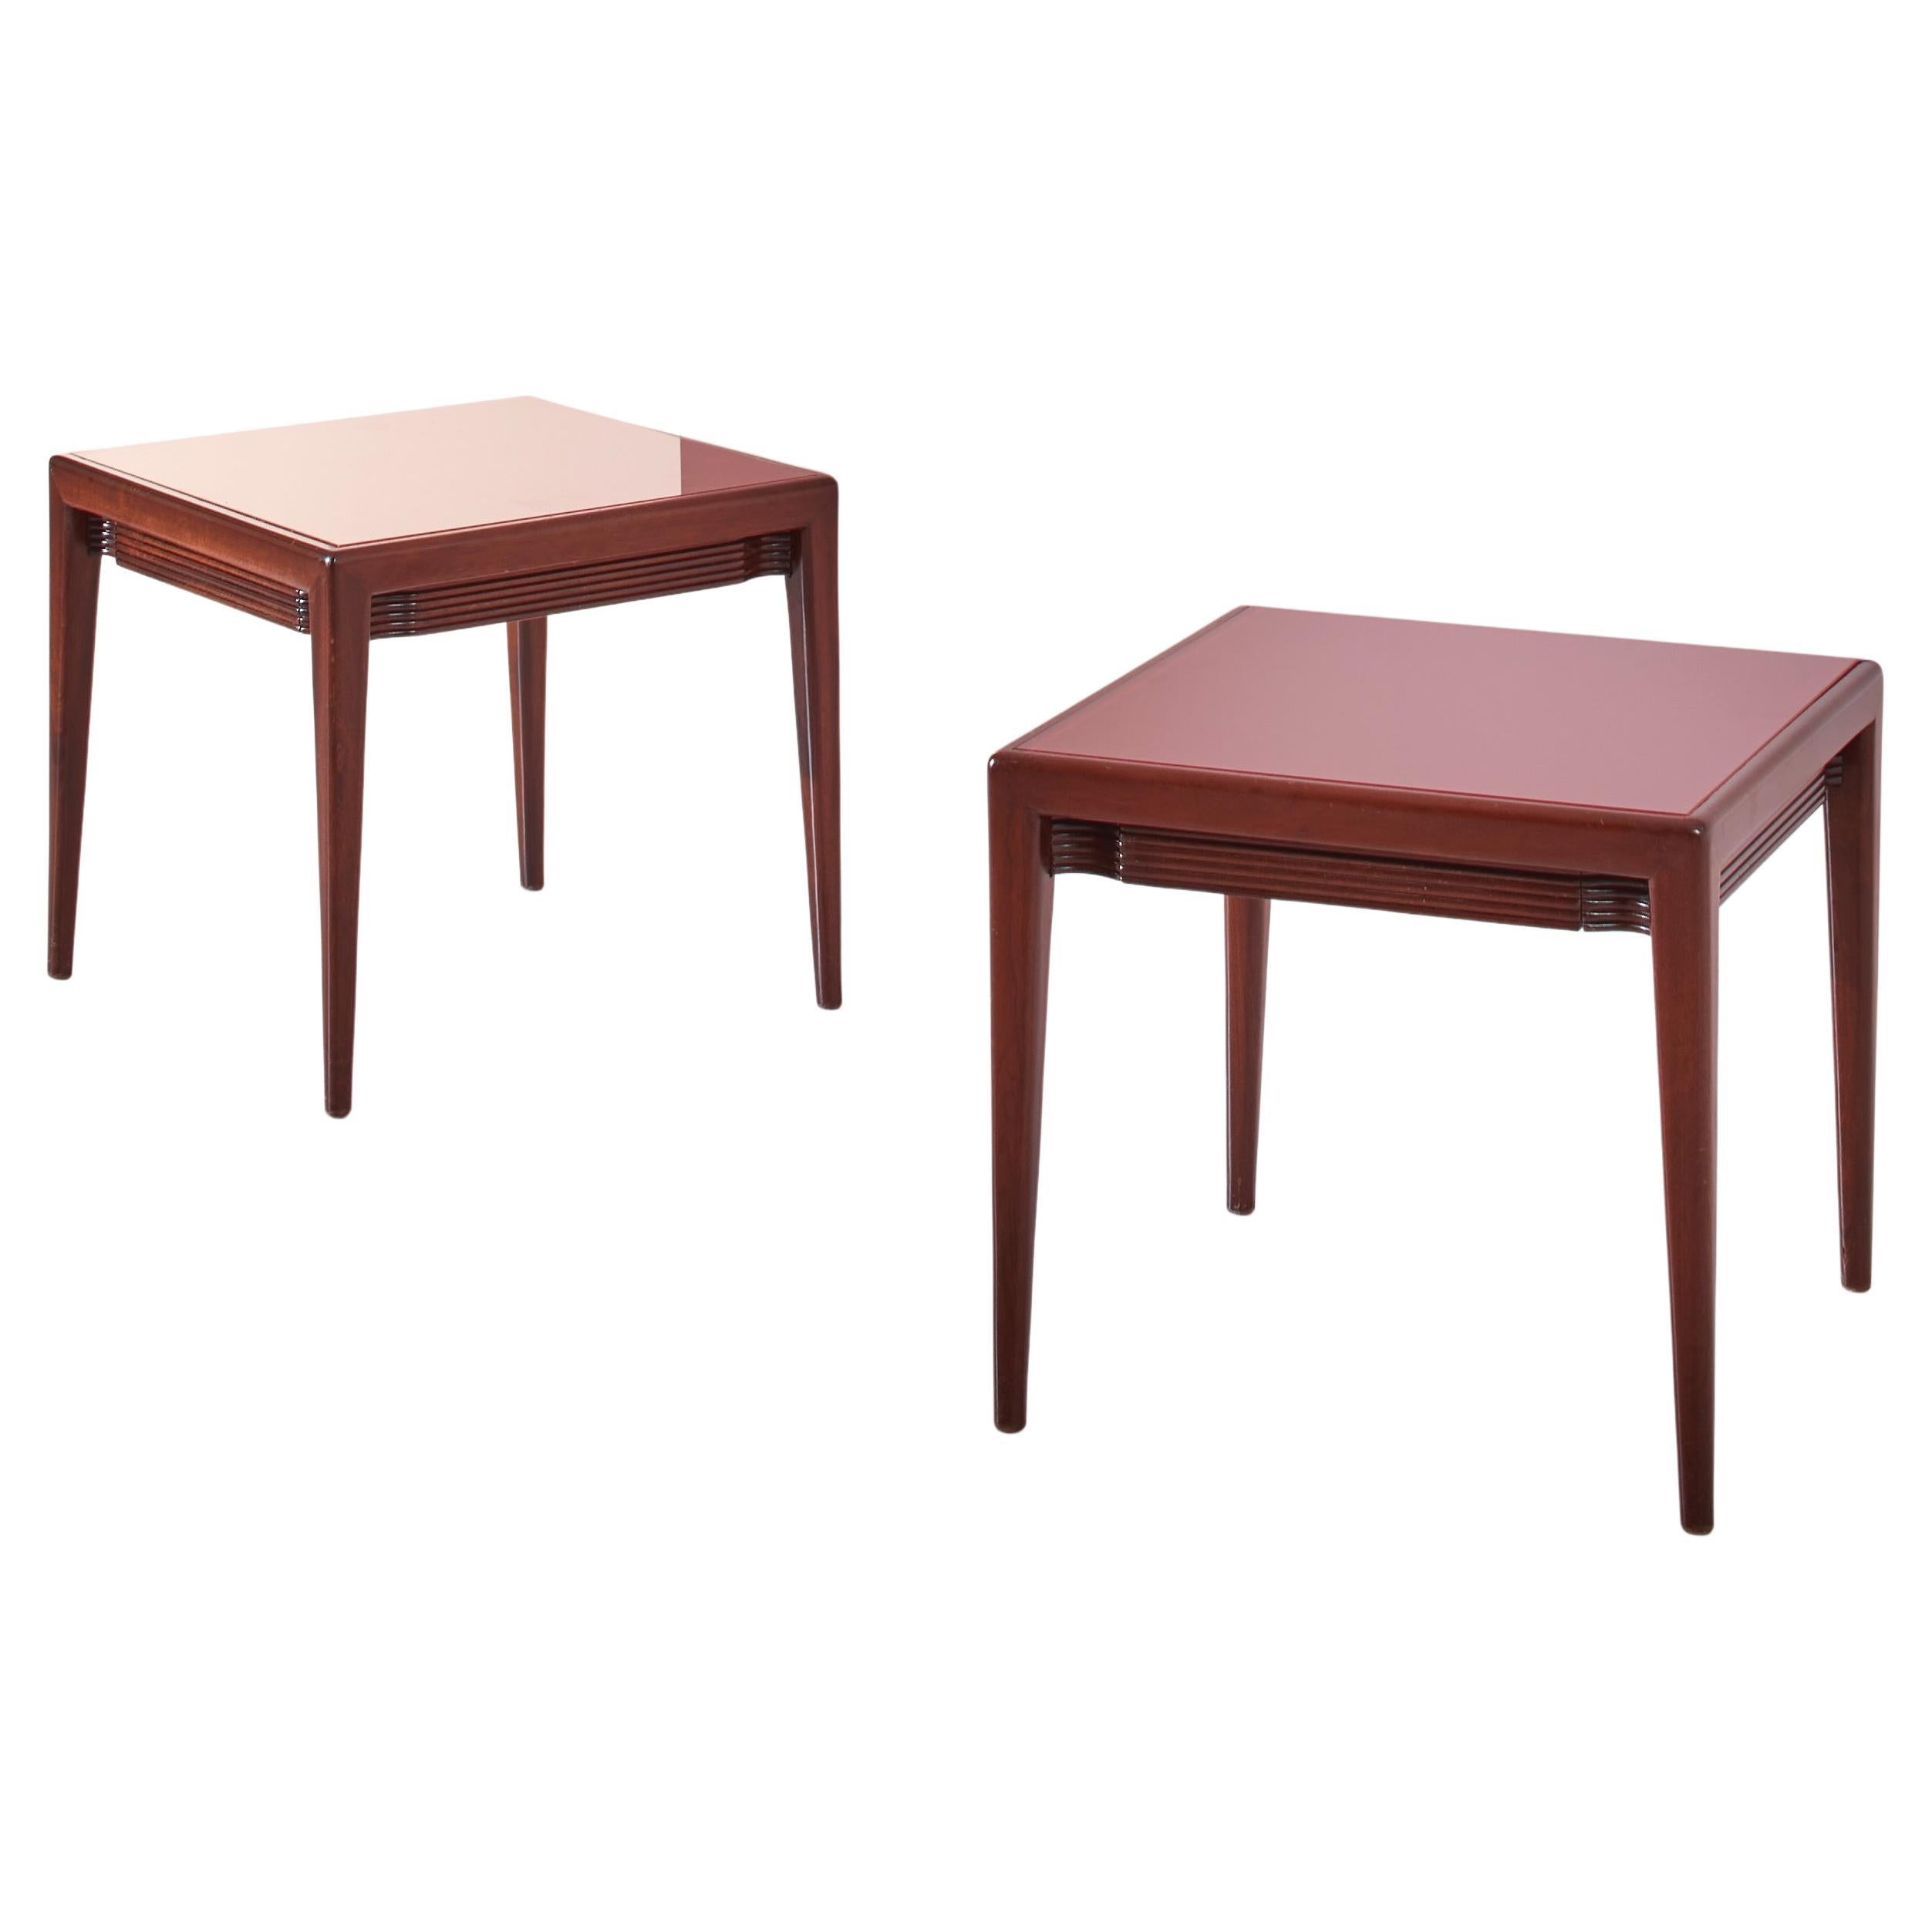 Osvaldo Borsani wooden and red glass side tables with a drawer, Italy, 1950s For Sale